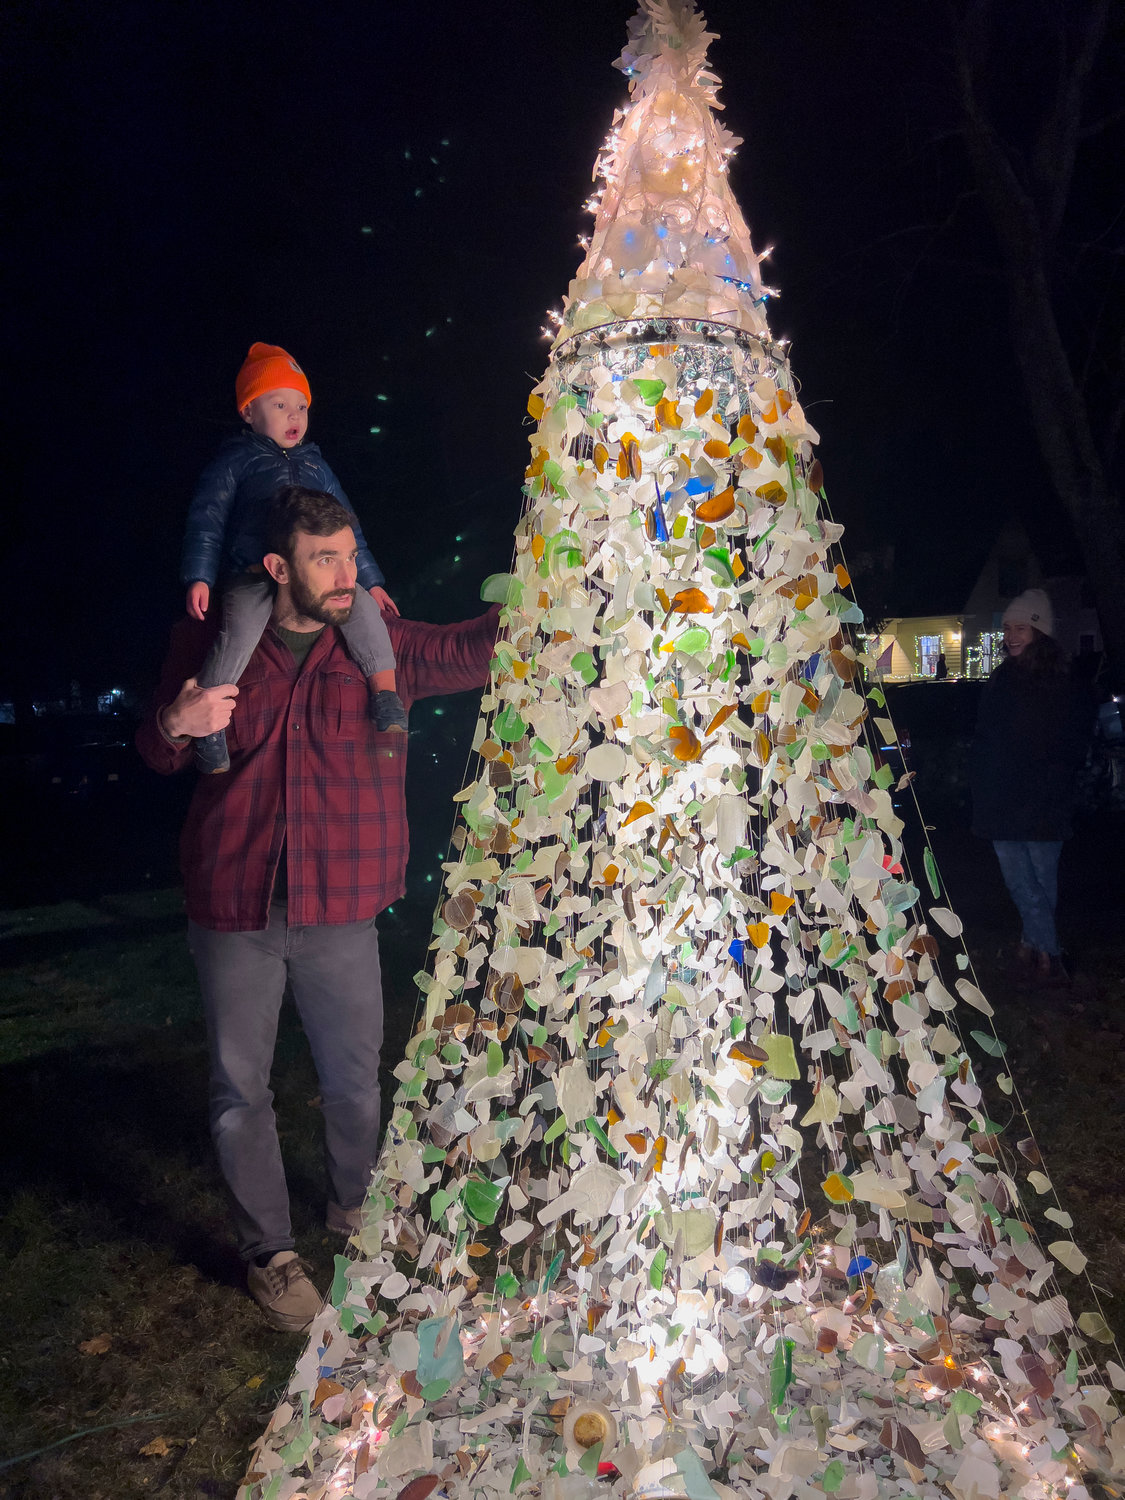 Sean Conlon and son, Remi, 2, gaze at the colorful tree made of locally found sea glass by John Viveiros and wife, Snooky.